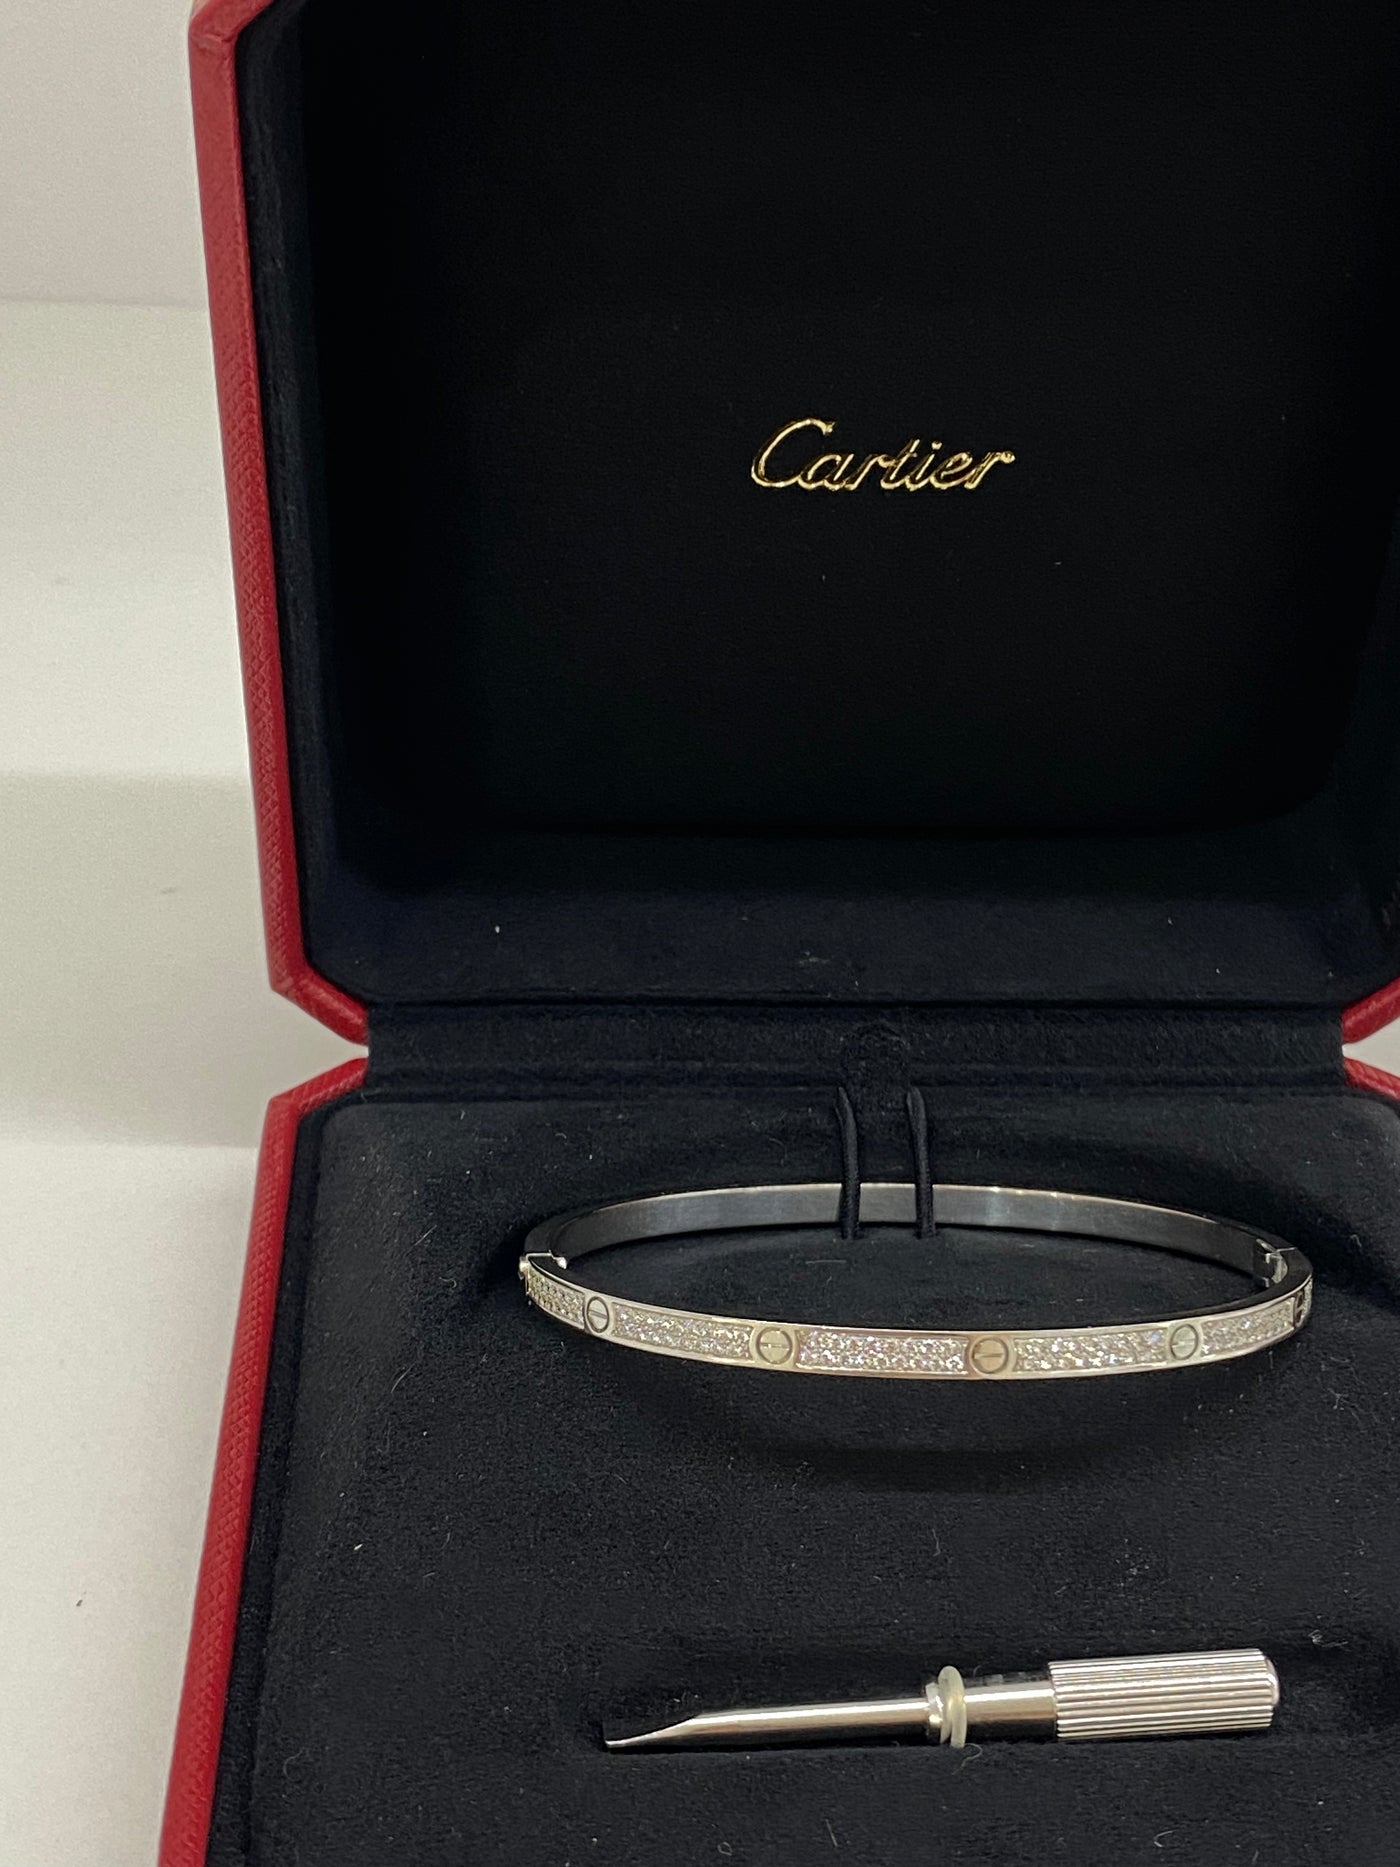 Cartier Love Bracelet - Small Model Paved White Gold with Daimonds  Size 19